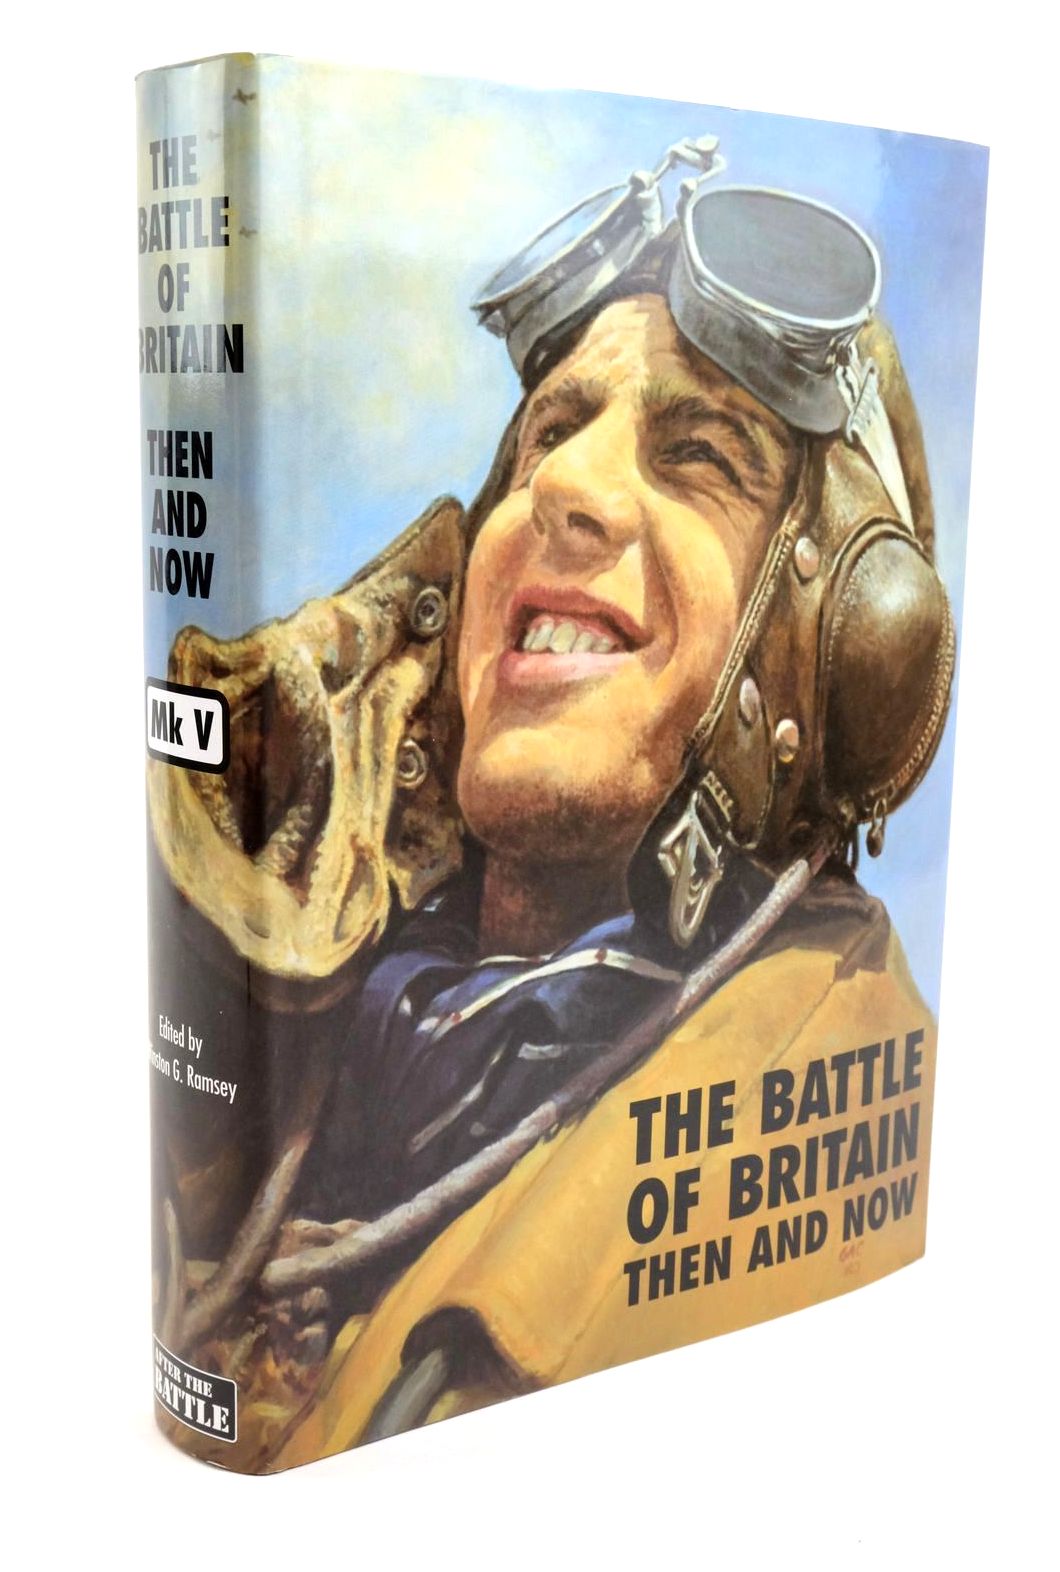 Photo of THE BATTLE OF BRITAIN THEN AND NOW MK V written by Ramsey, Winston G. published by Battle Of Britain International Limited (STOCK CODE: 1322178)  for sale by Stella & Rose's Books